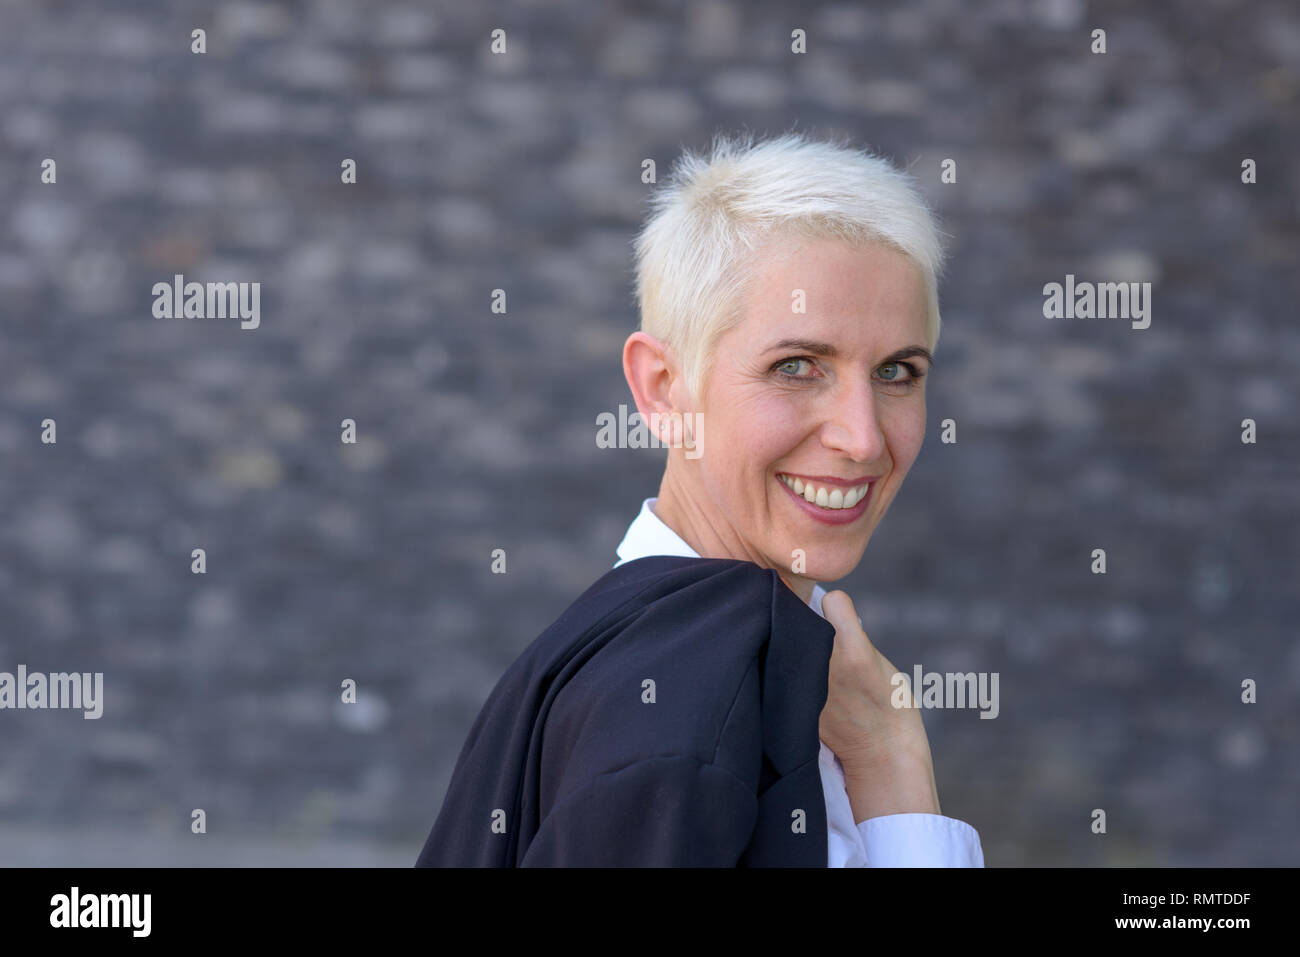 Happy woman is wearing her jacket over her shoulder in front of a black wall Stock Photo